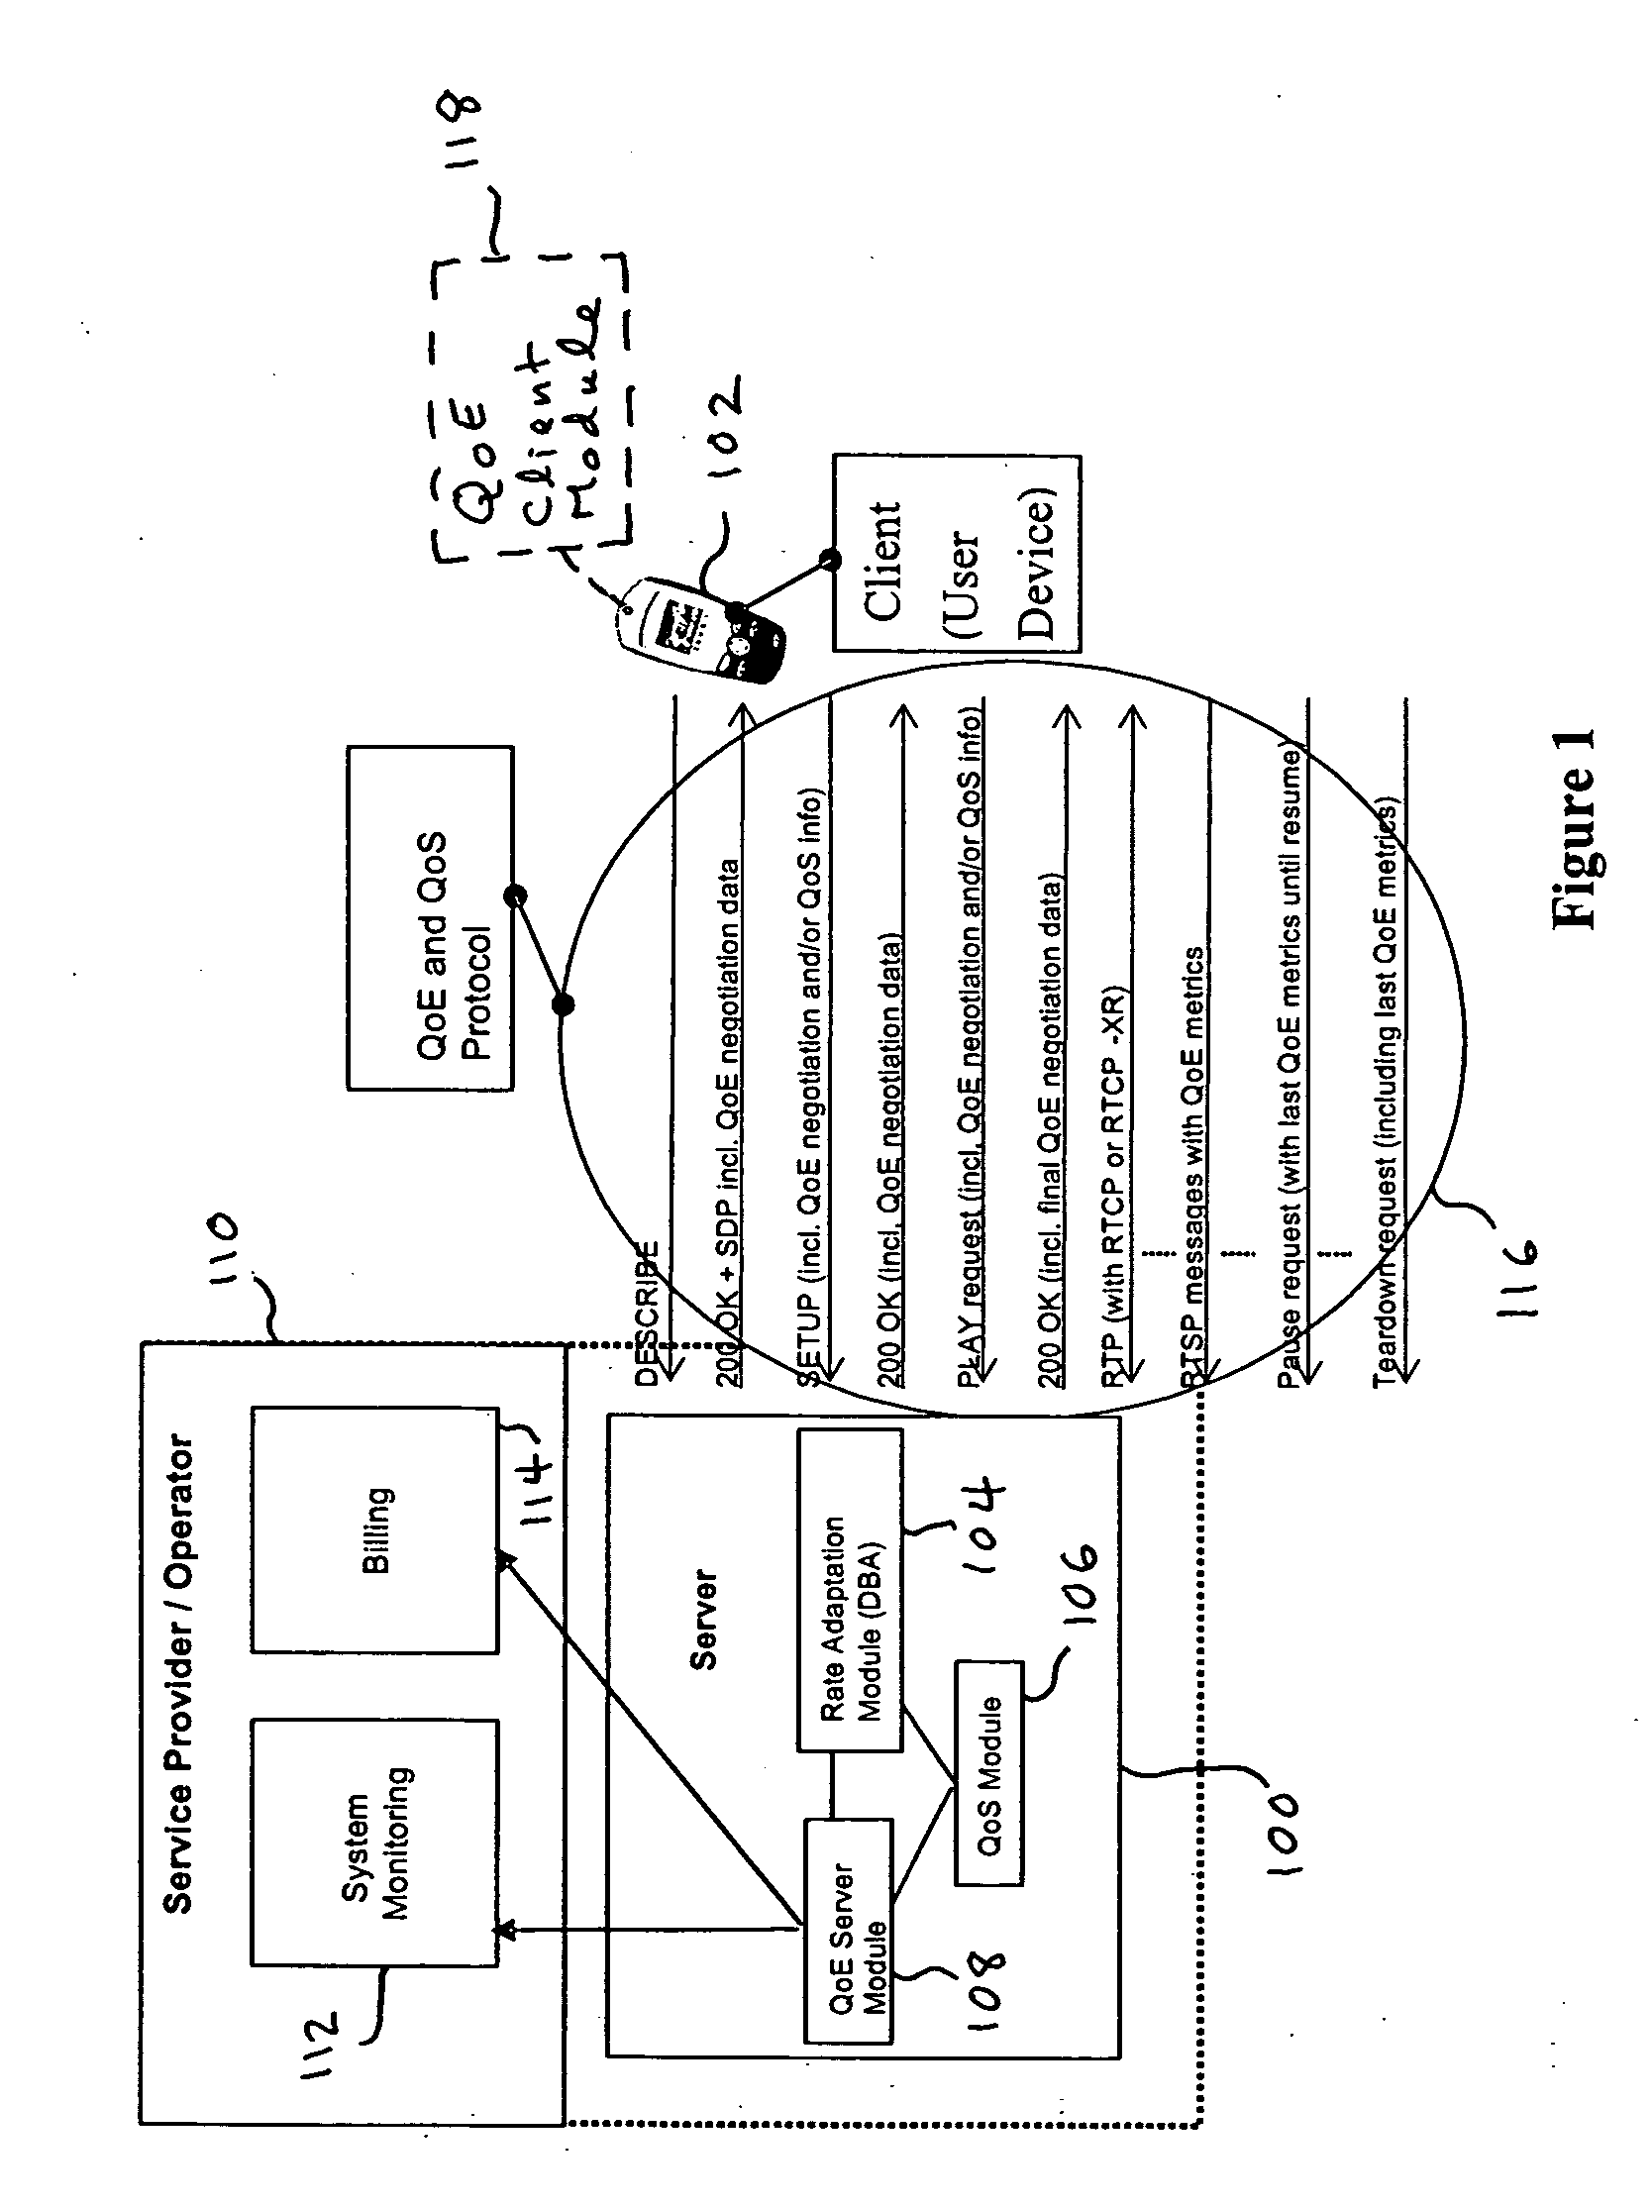 Quality of experience (QOE) method and apparatus for wireless communication networks